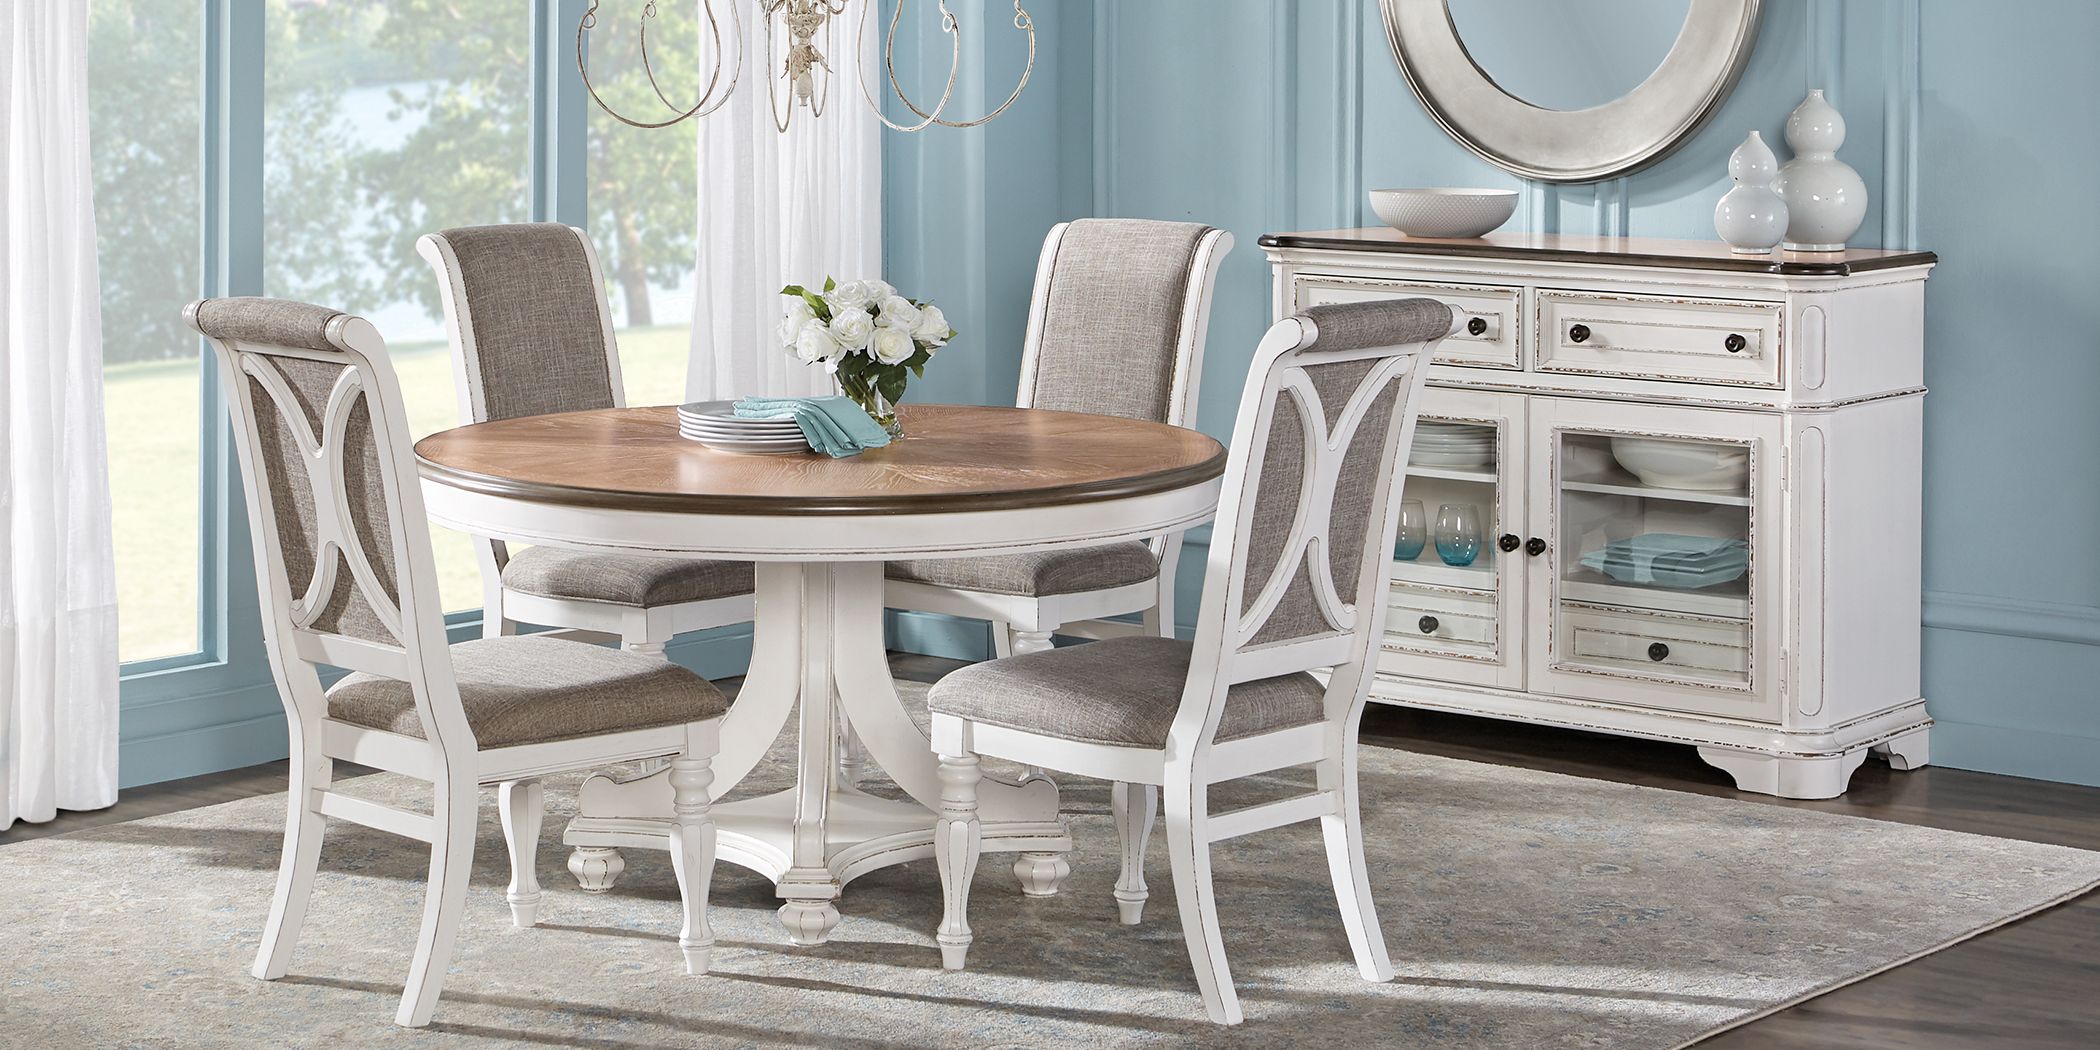 Dining Room Set At Rooms To Go